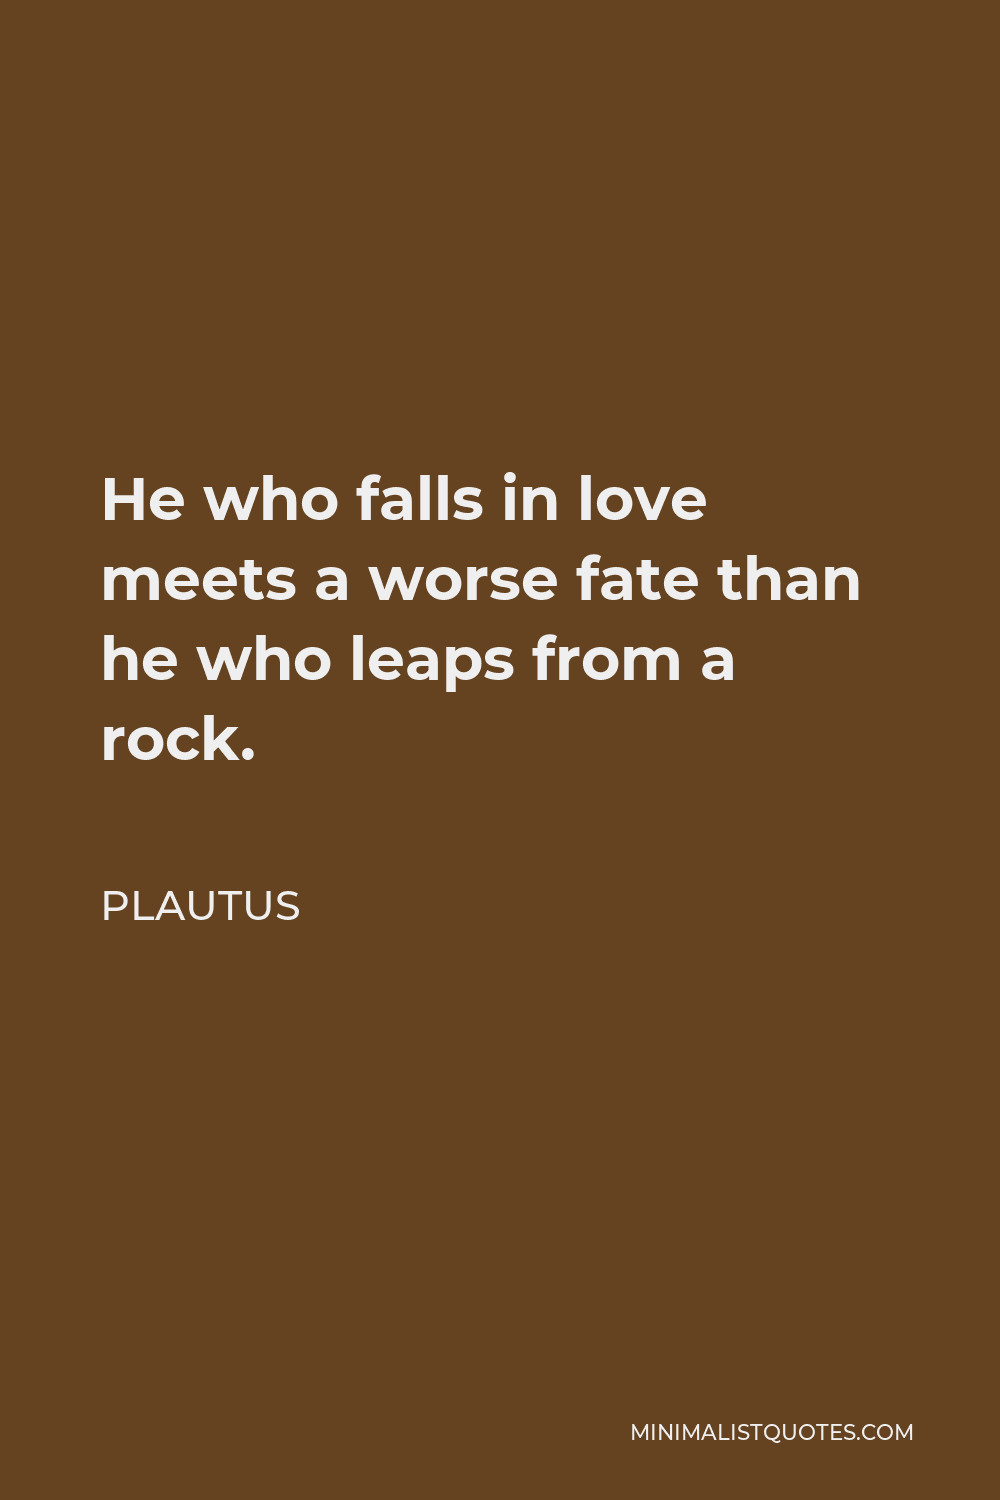 Plautus Quote - He who falls in love meets a worse fate than he who leaps from a rock.